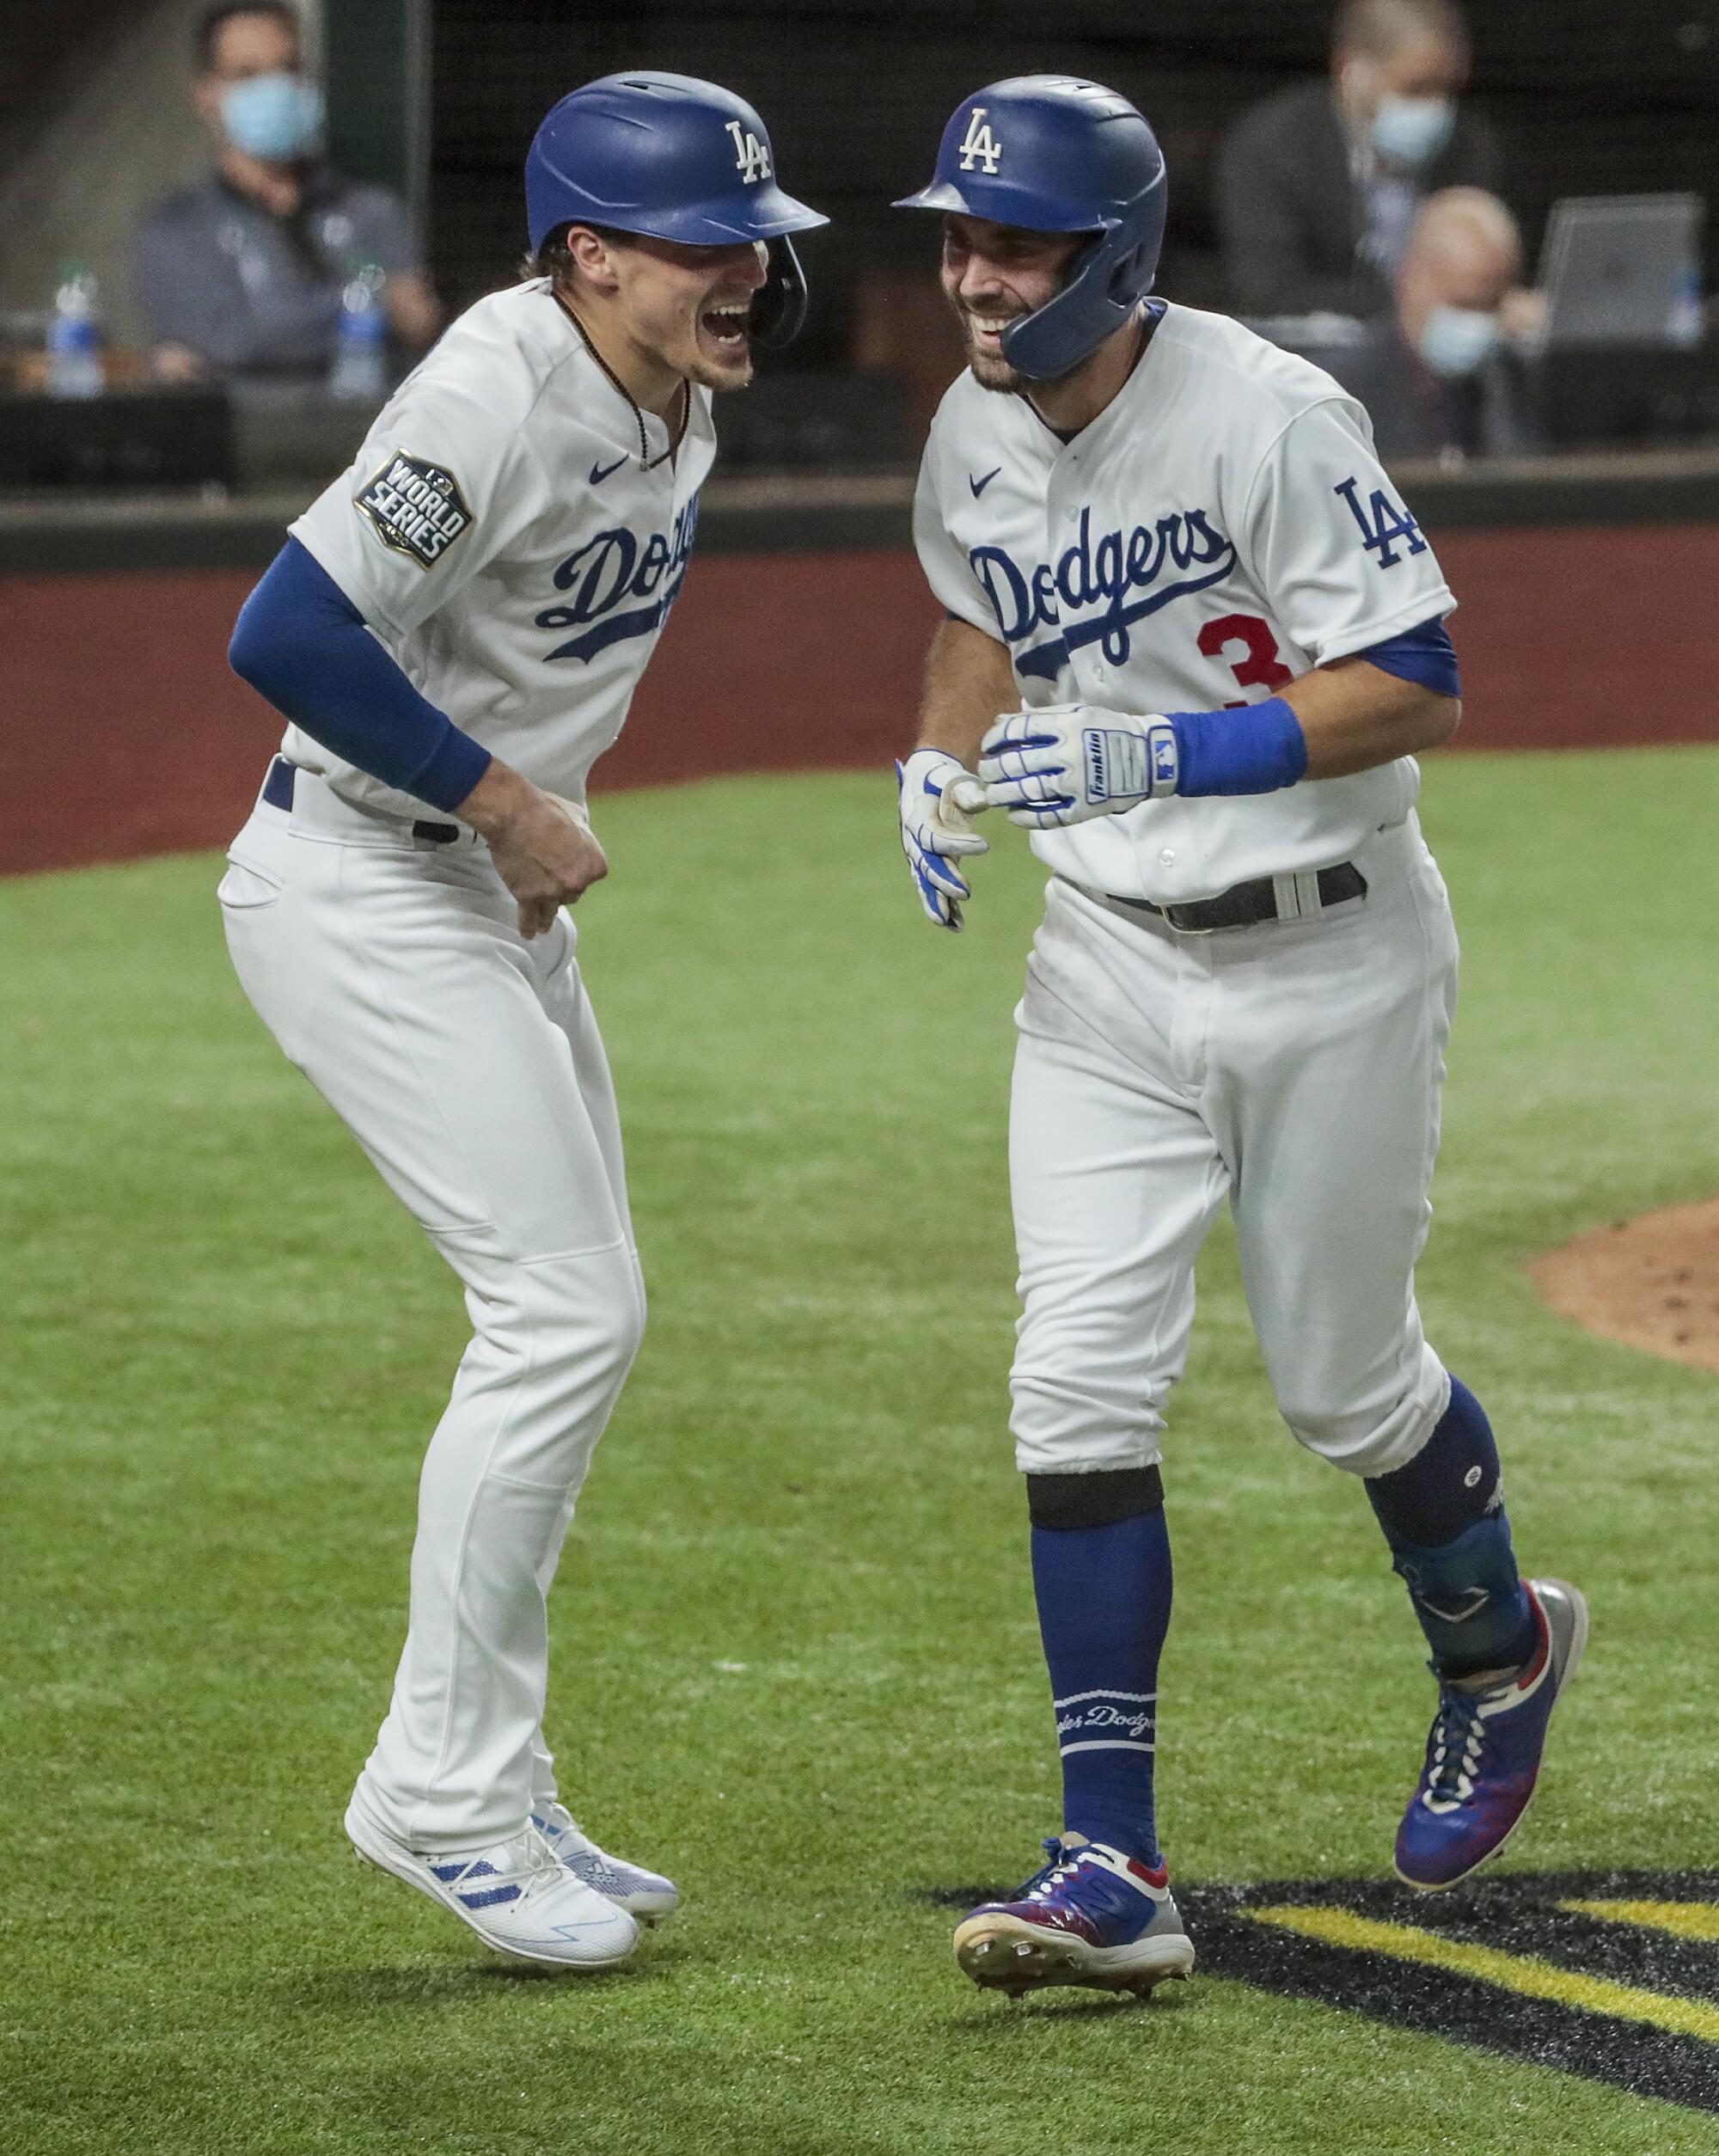 Dodgers second baseman Chris Taylor homers in the fifth inning and gets an earful from second baseman Kike Hernandez.